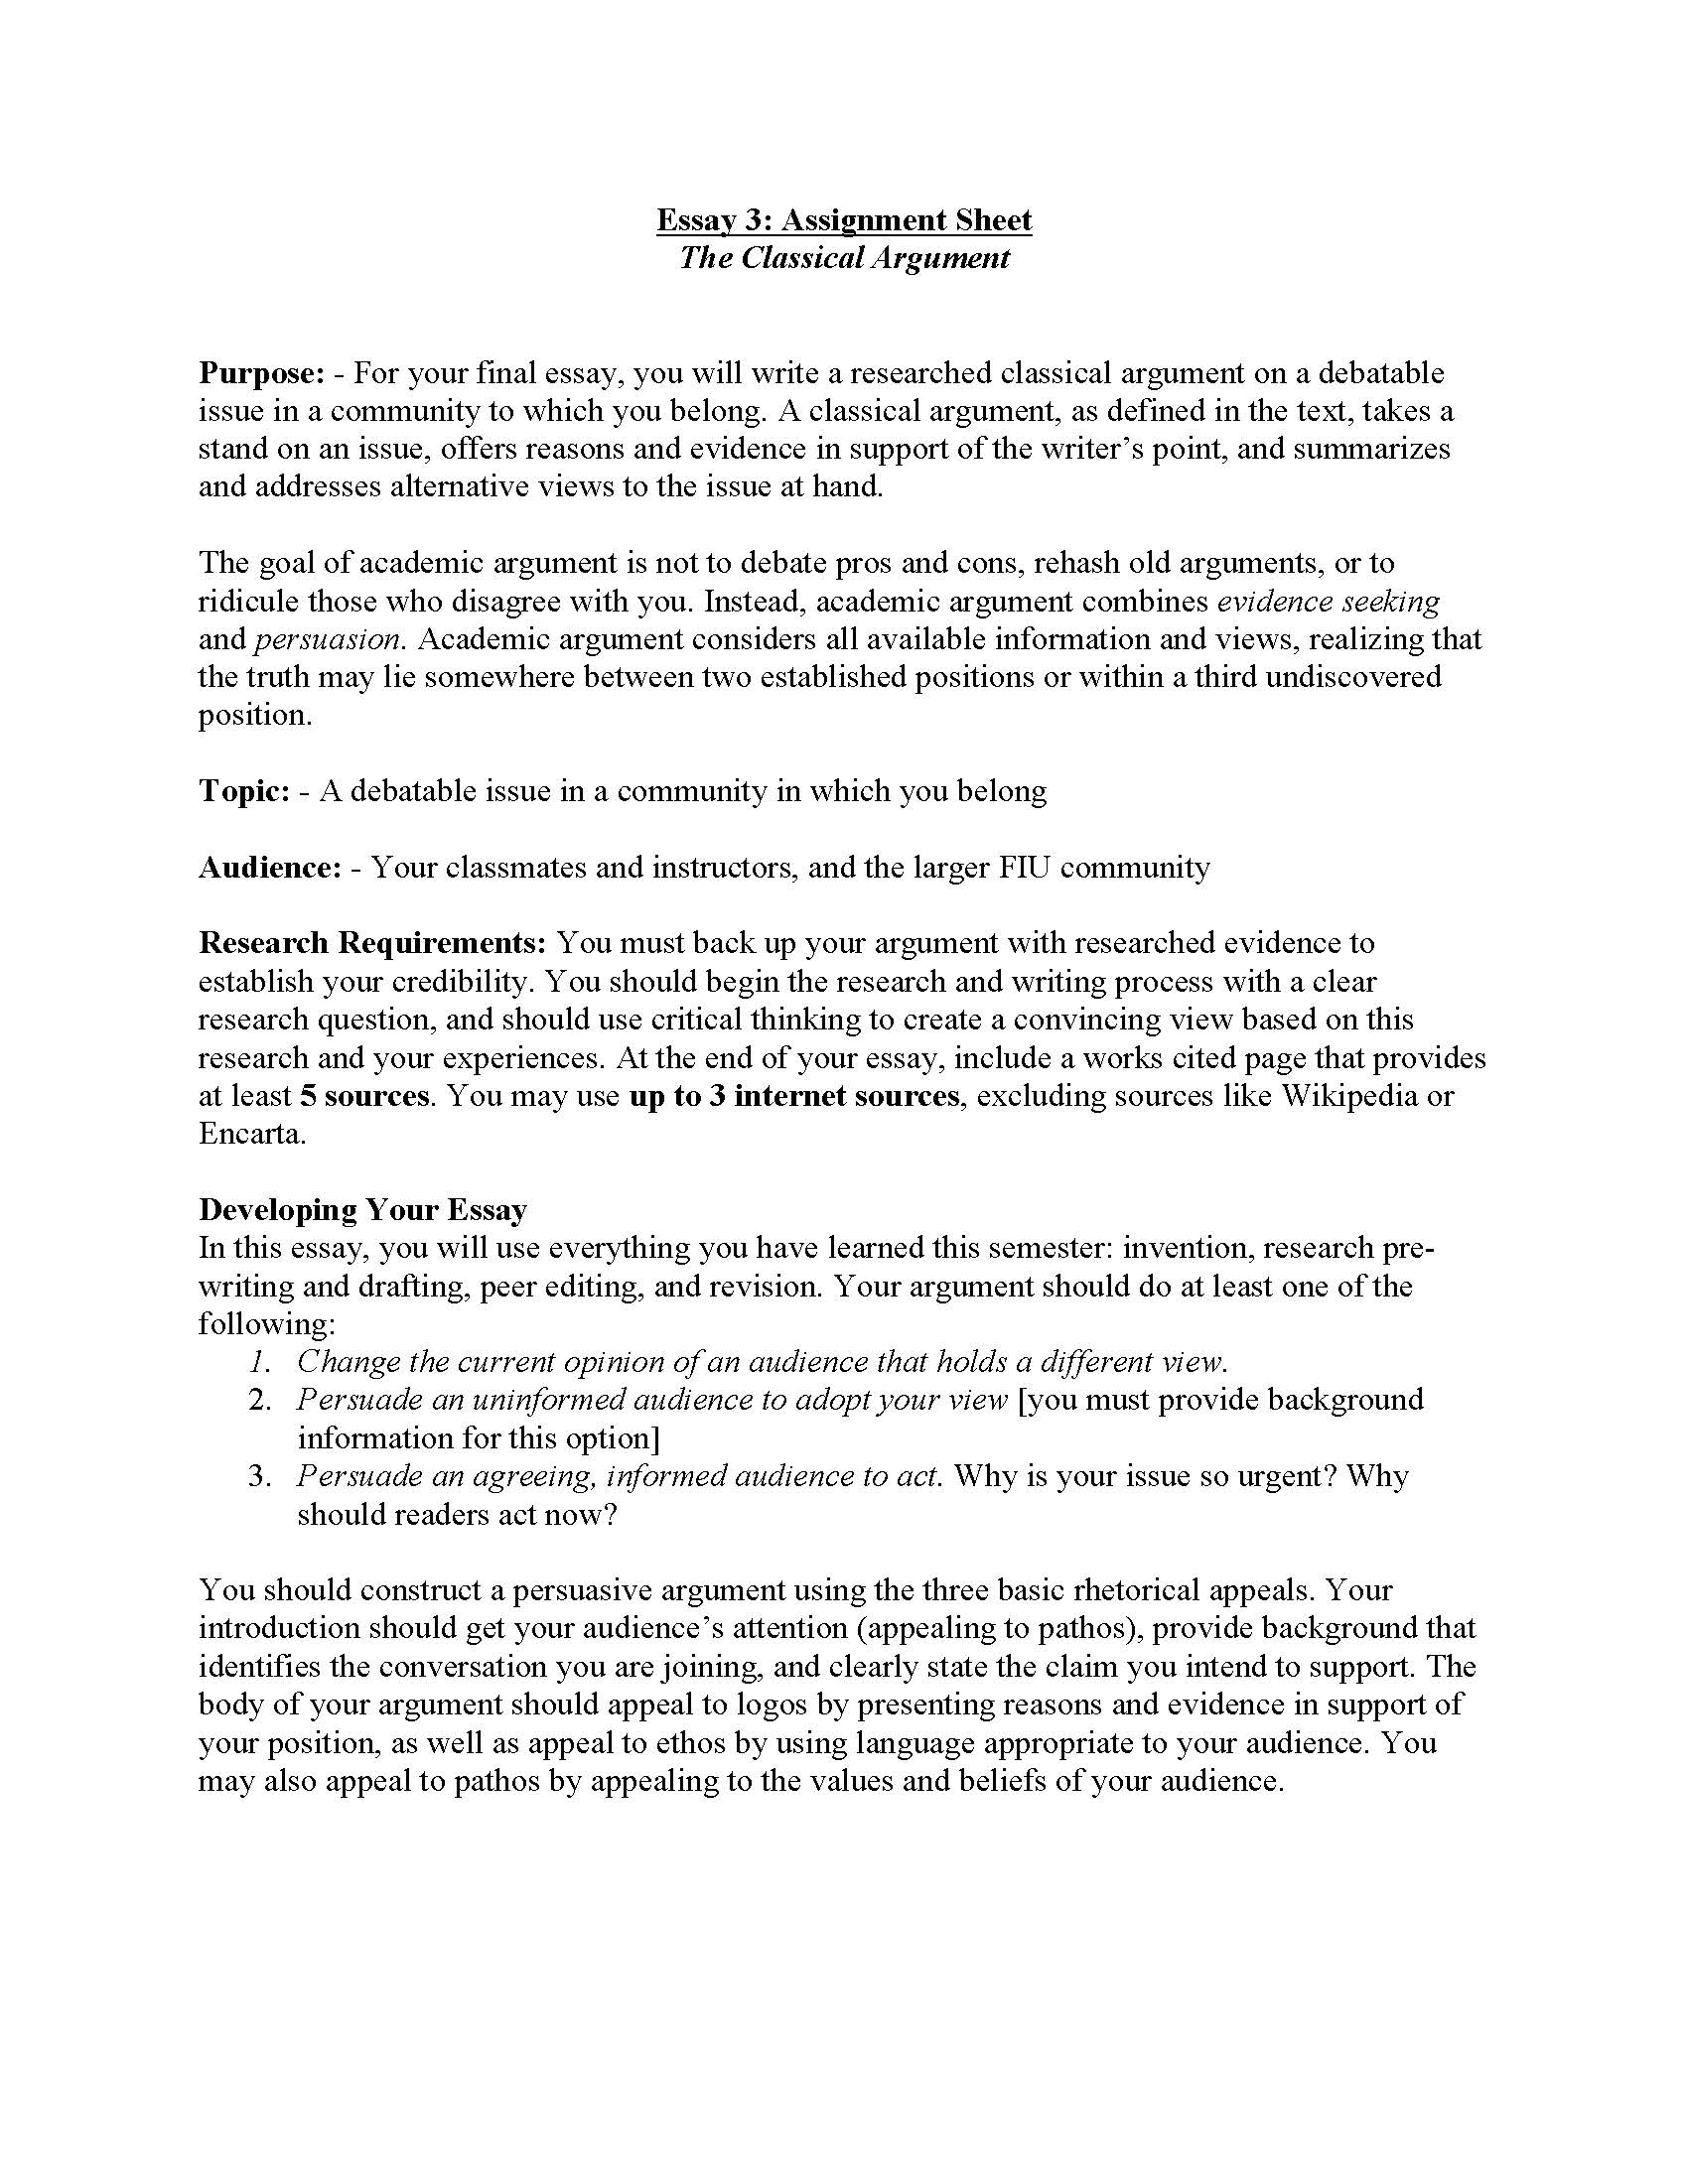 Help with writing a paper for college